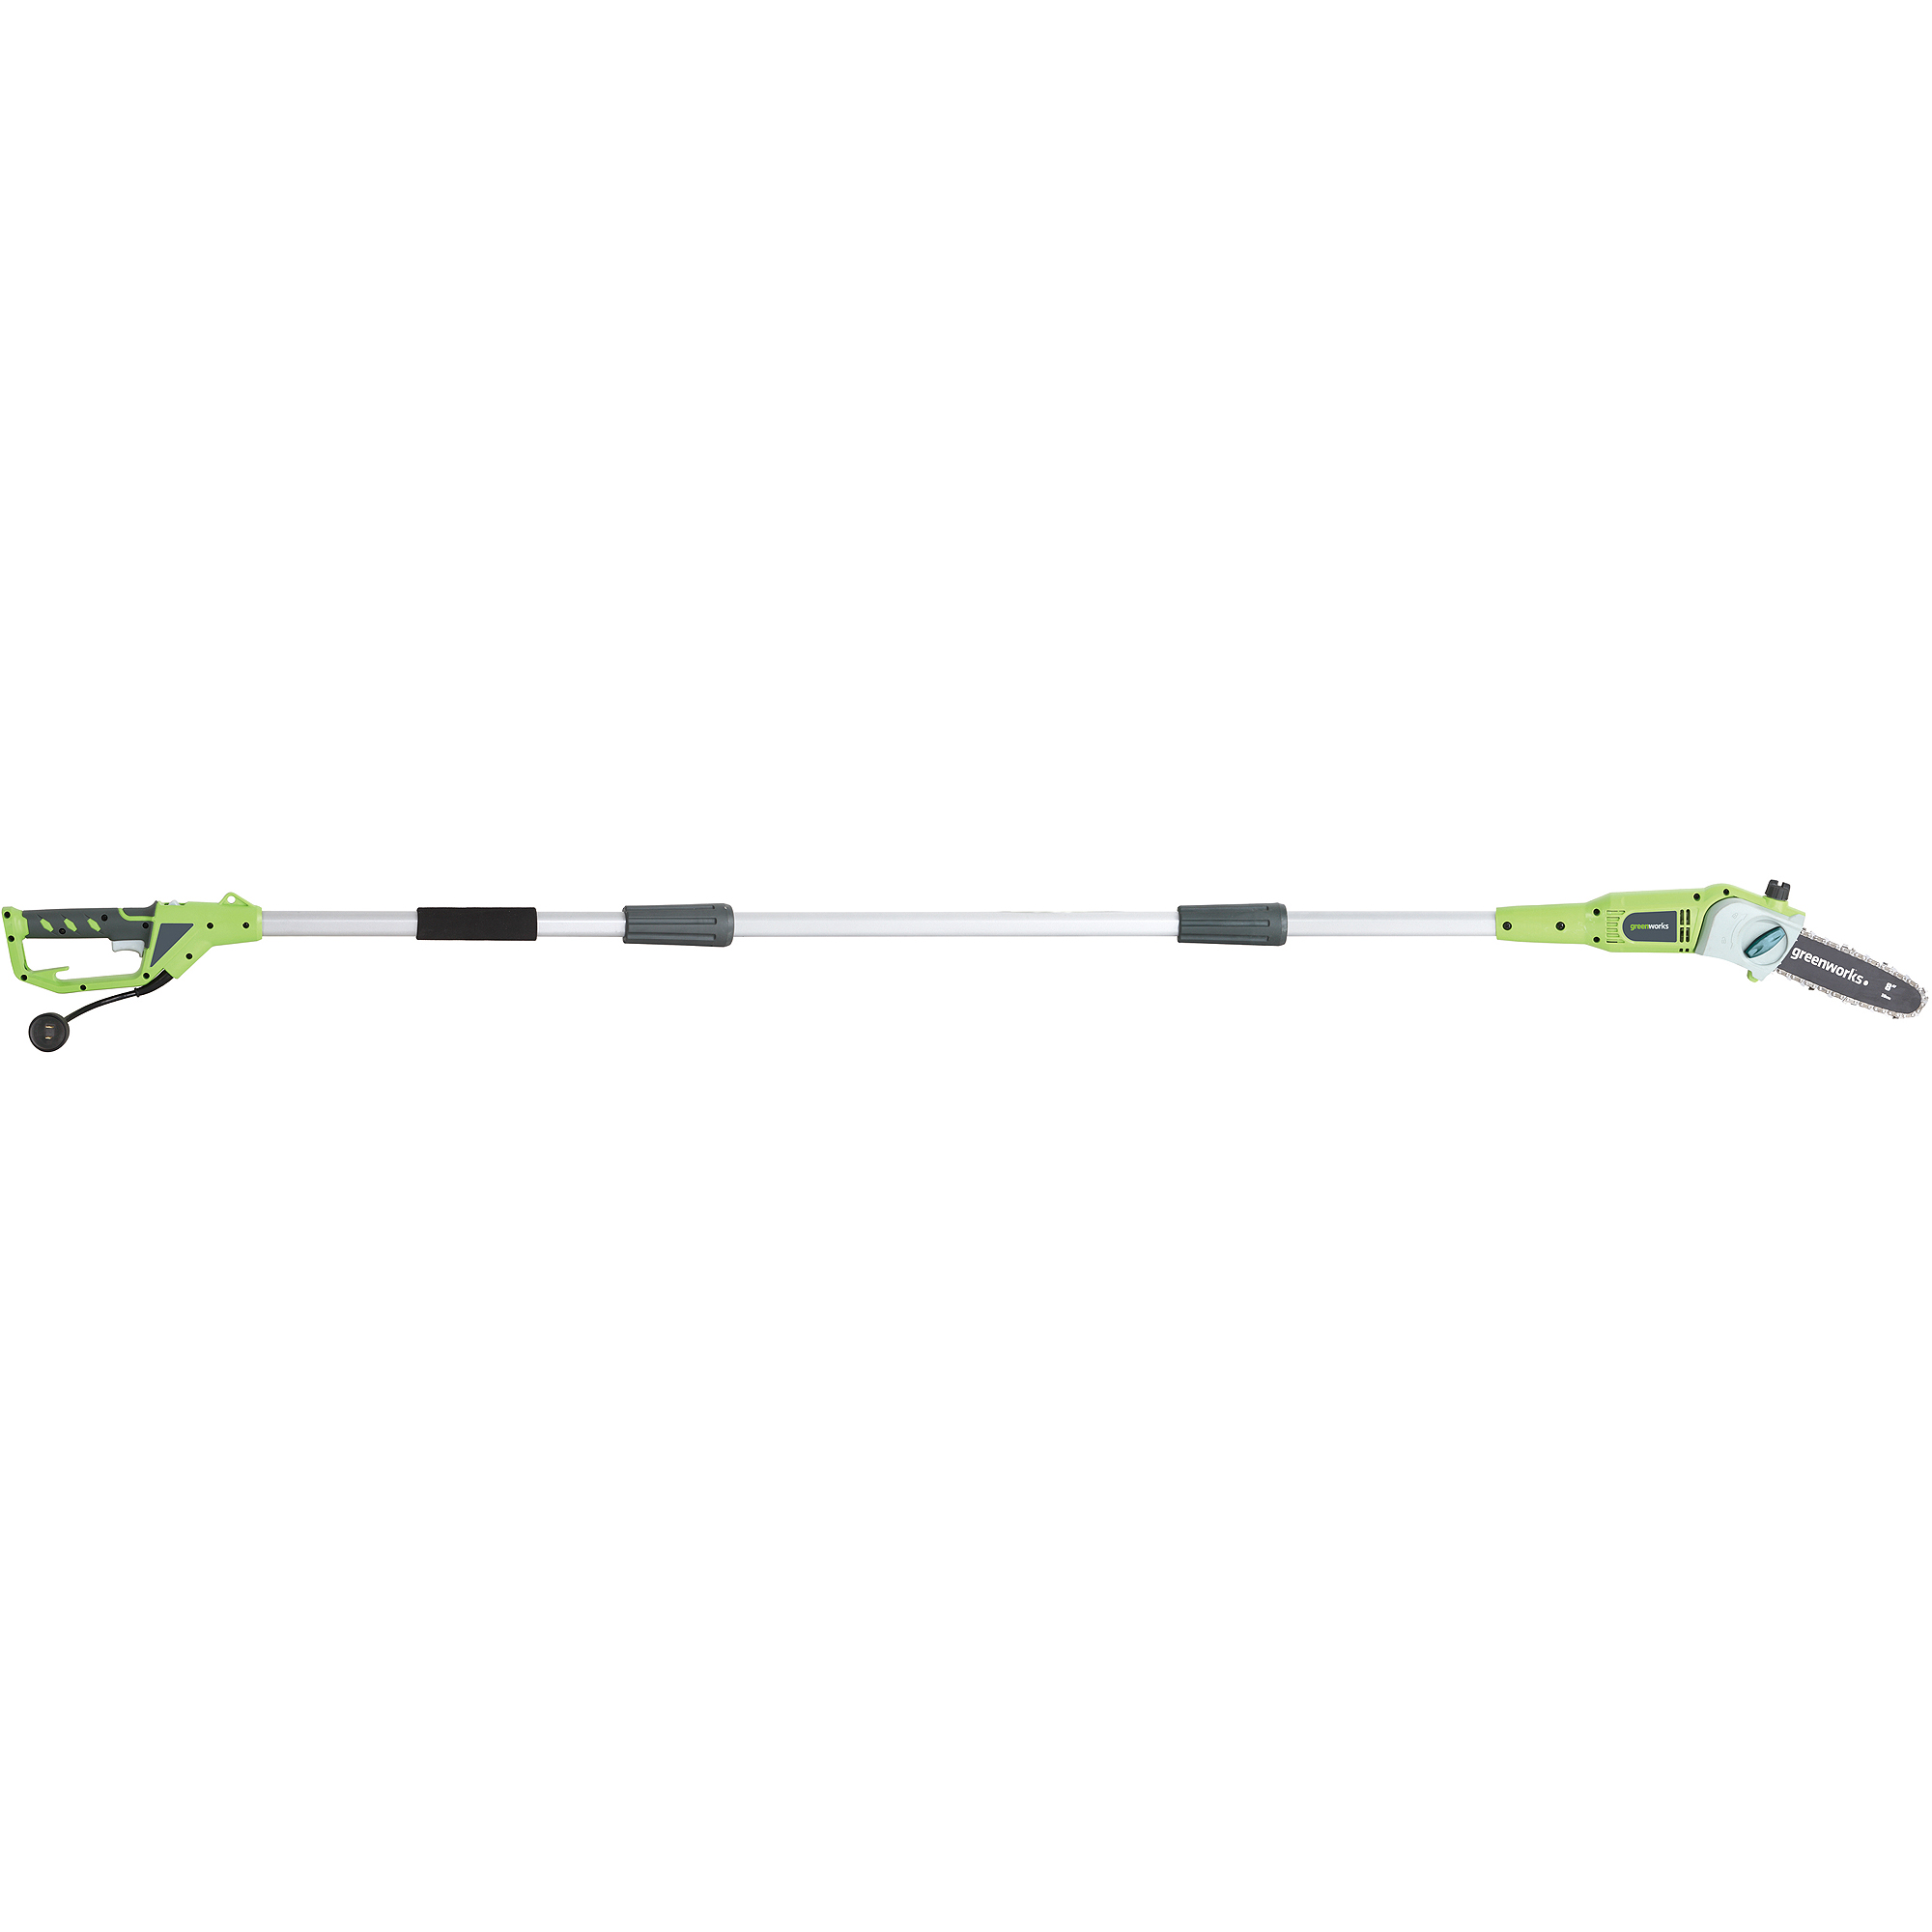 Greenworks 65 Amp 8-Inch Corded Electric Pole Saw, 20192 - image 1 of 10